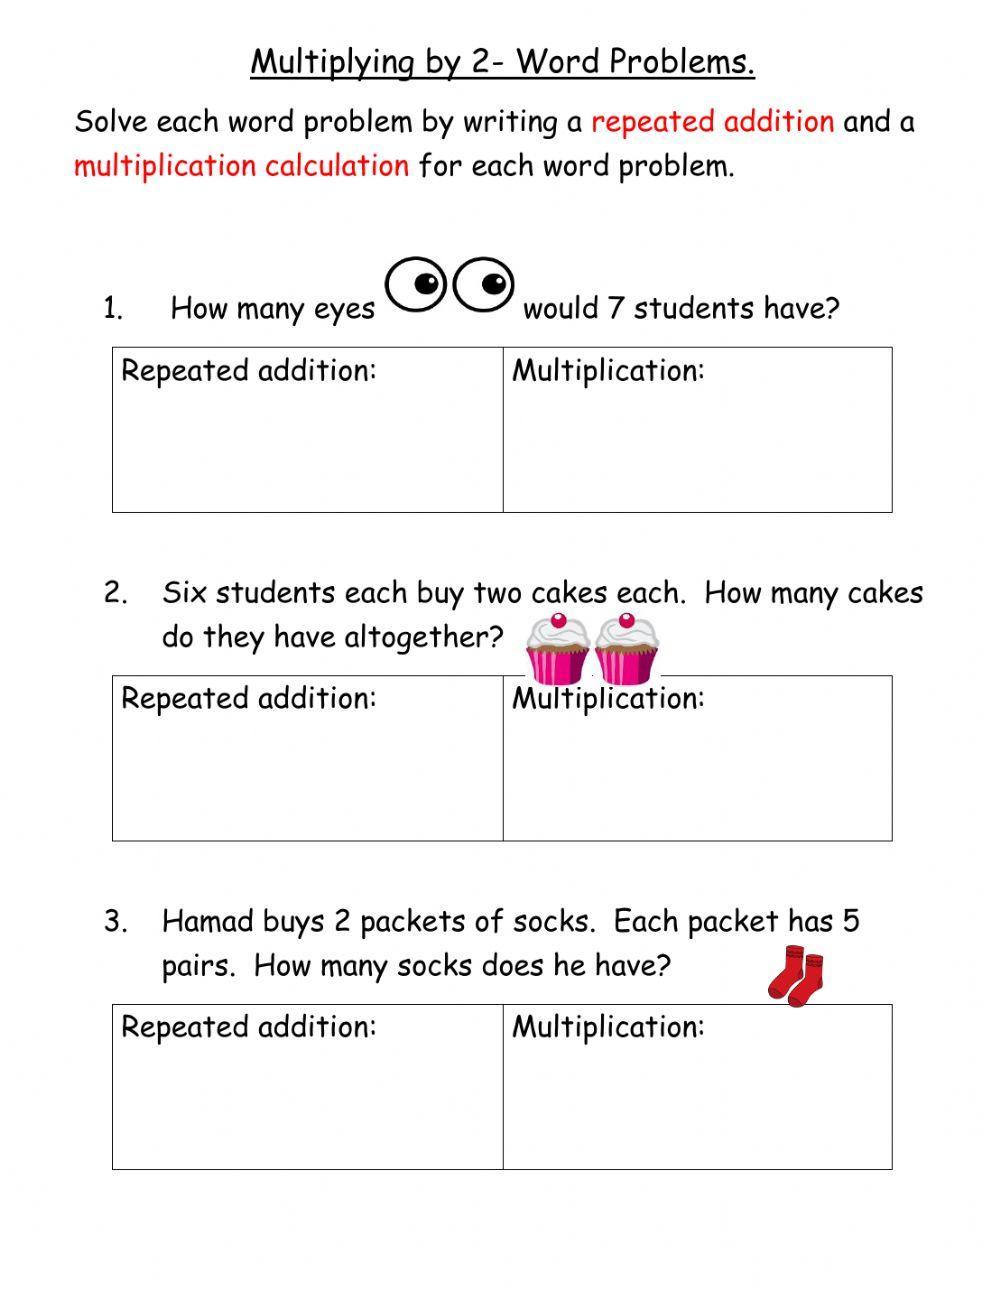 Word problems for multiplying by 2